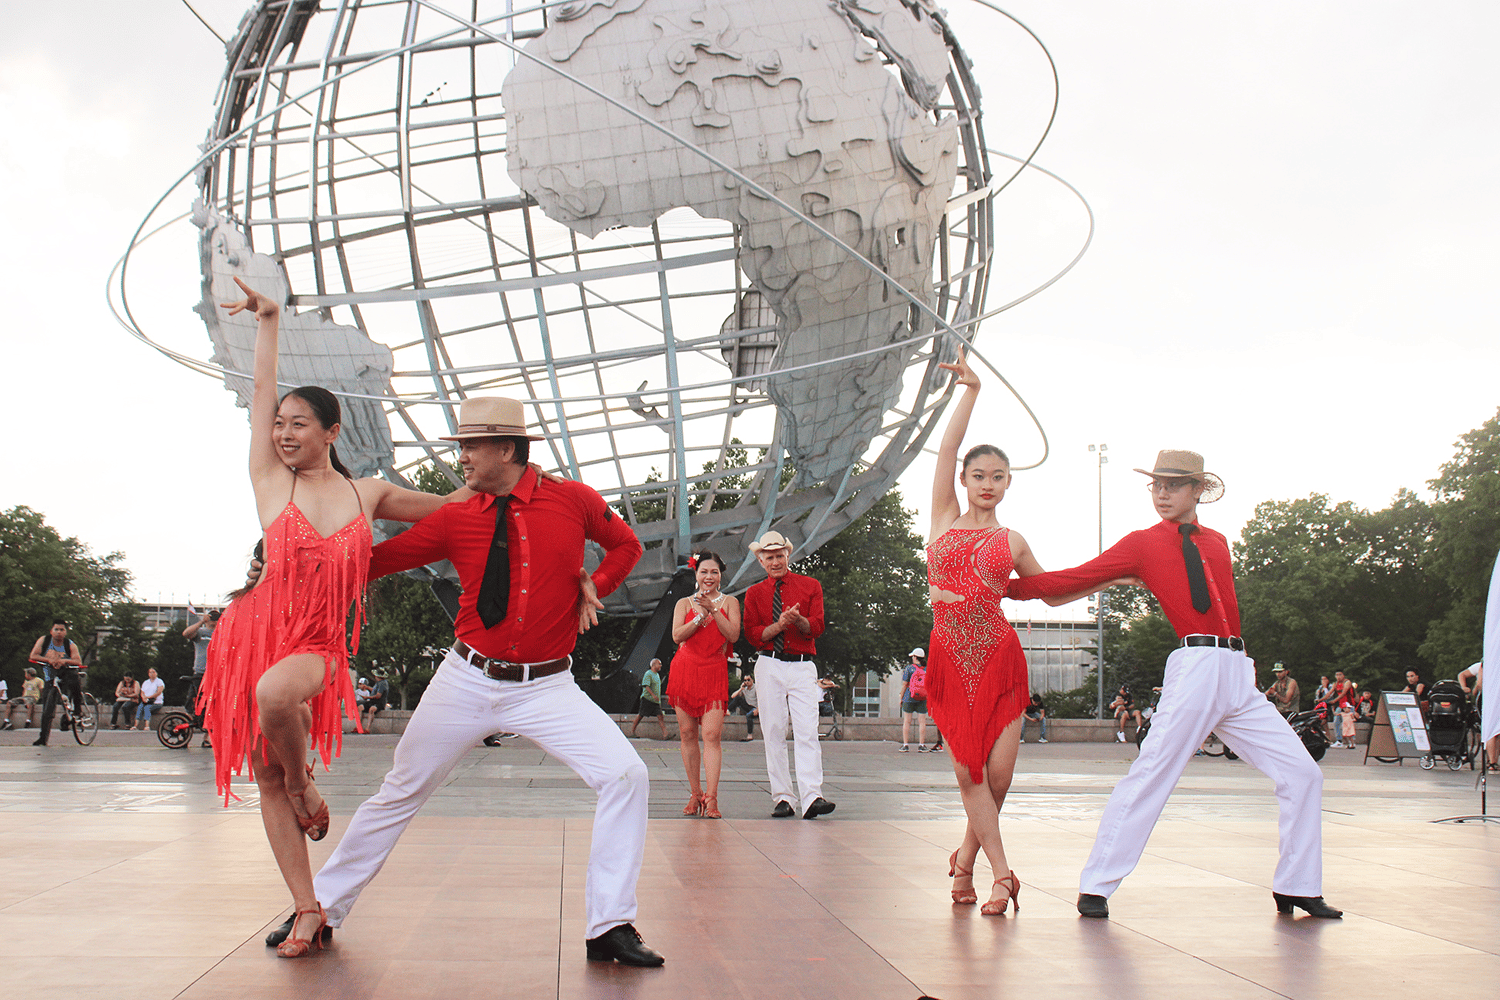 Dancers in red shirts and dresses performing in front of the Unisphere